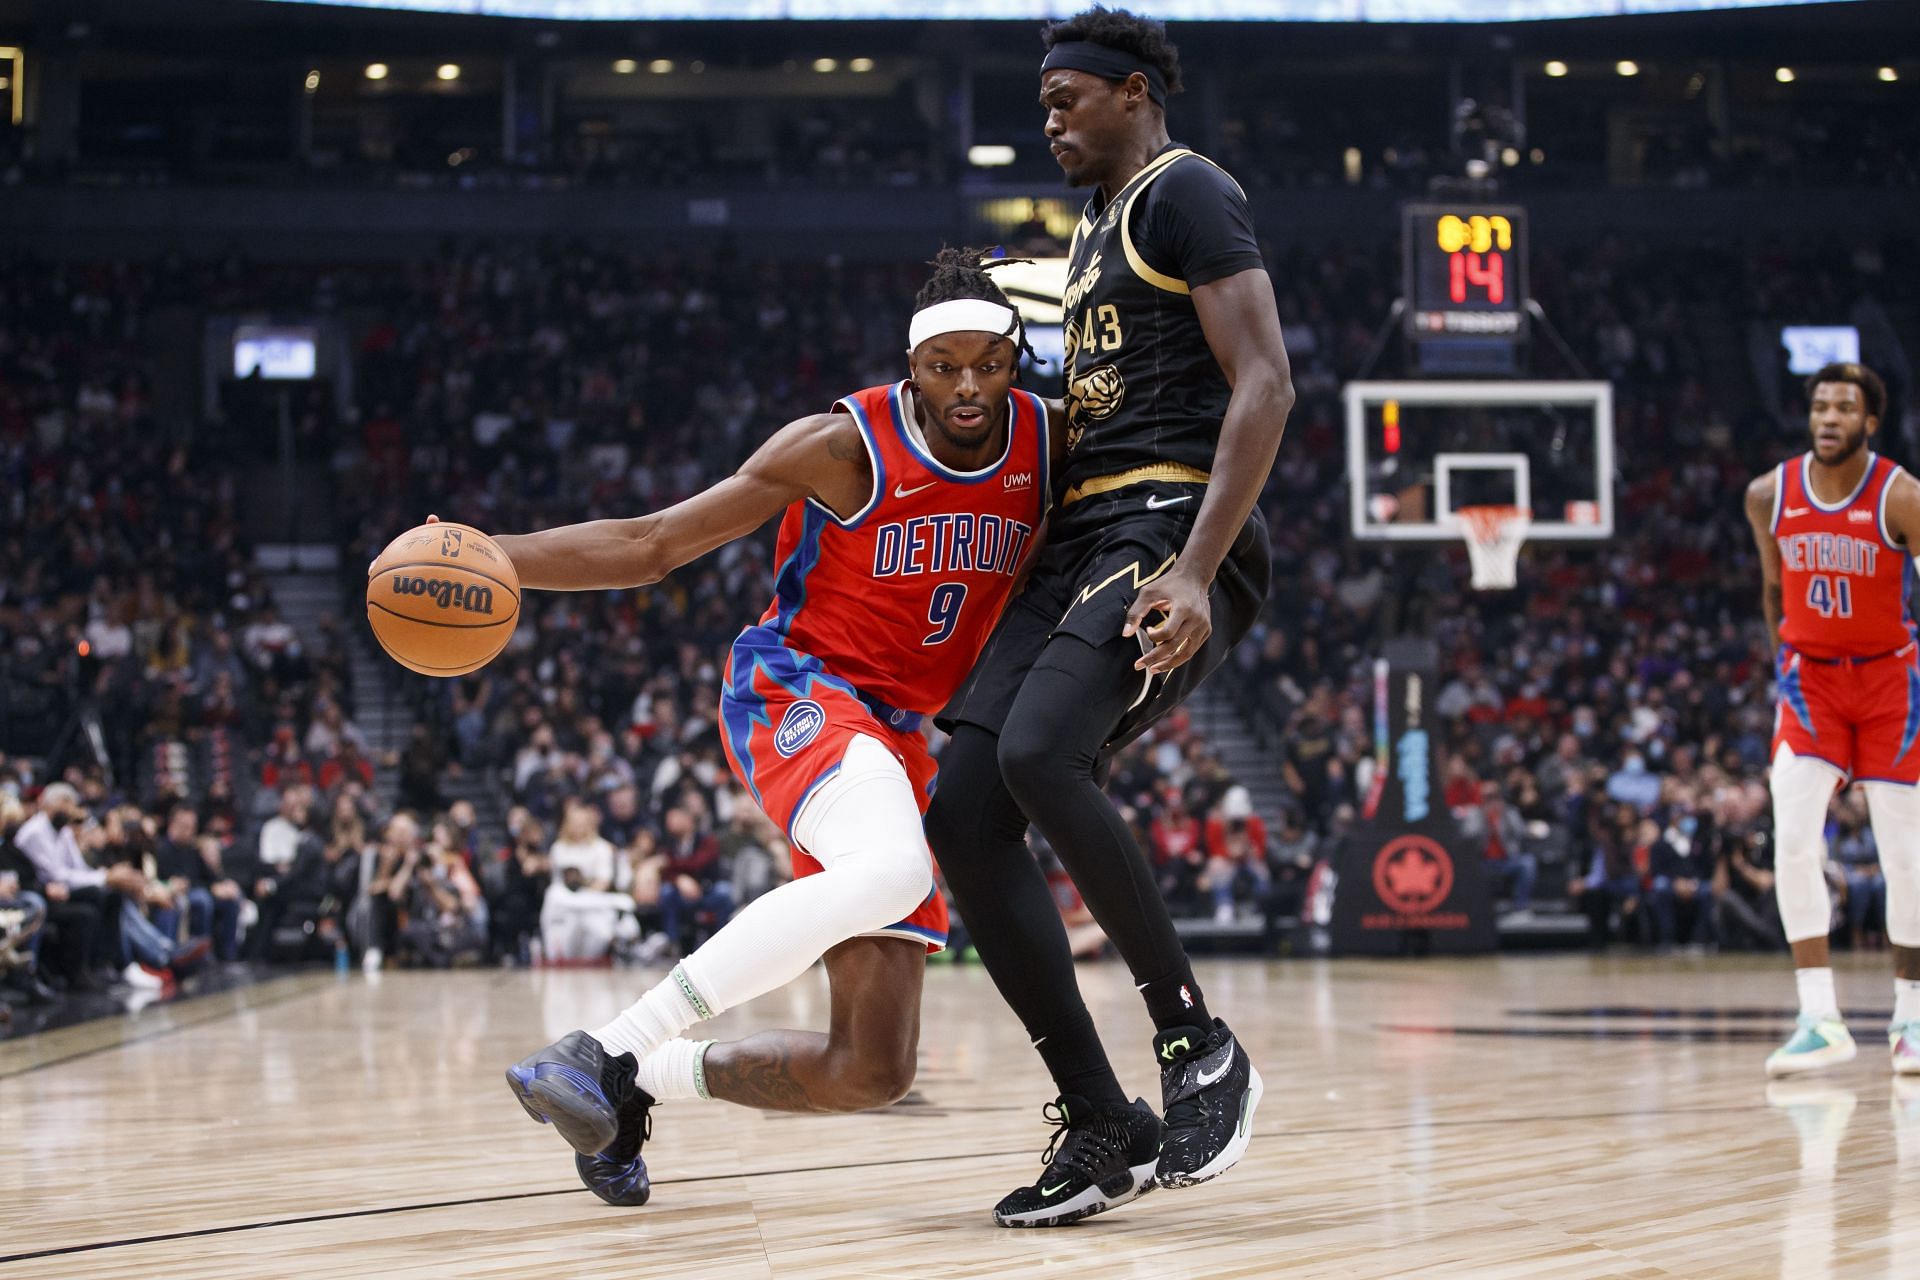 Detroit Pistons forward Jerami Grant with the ball